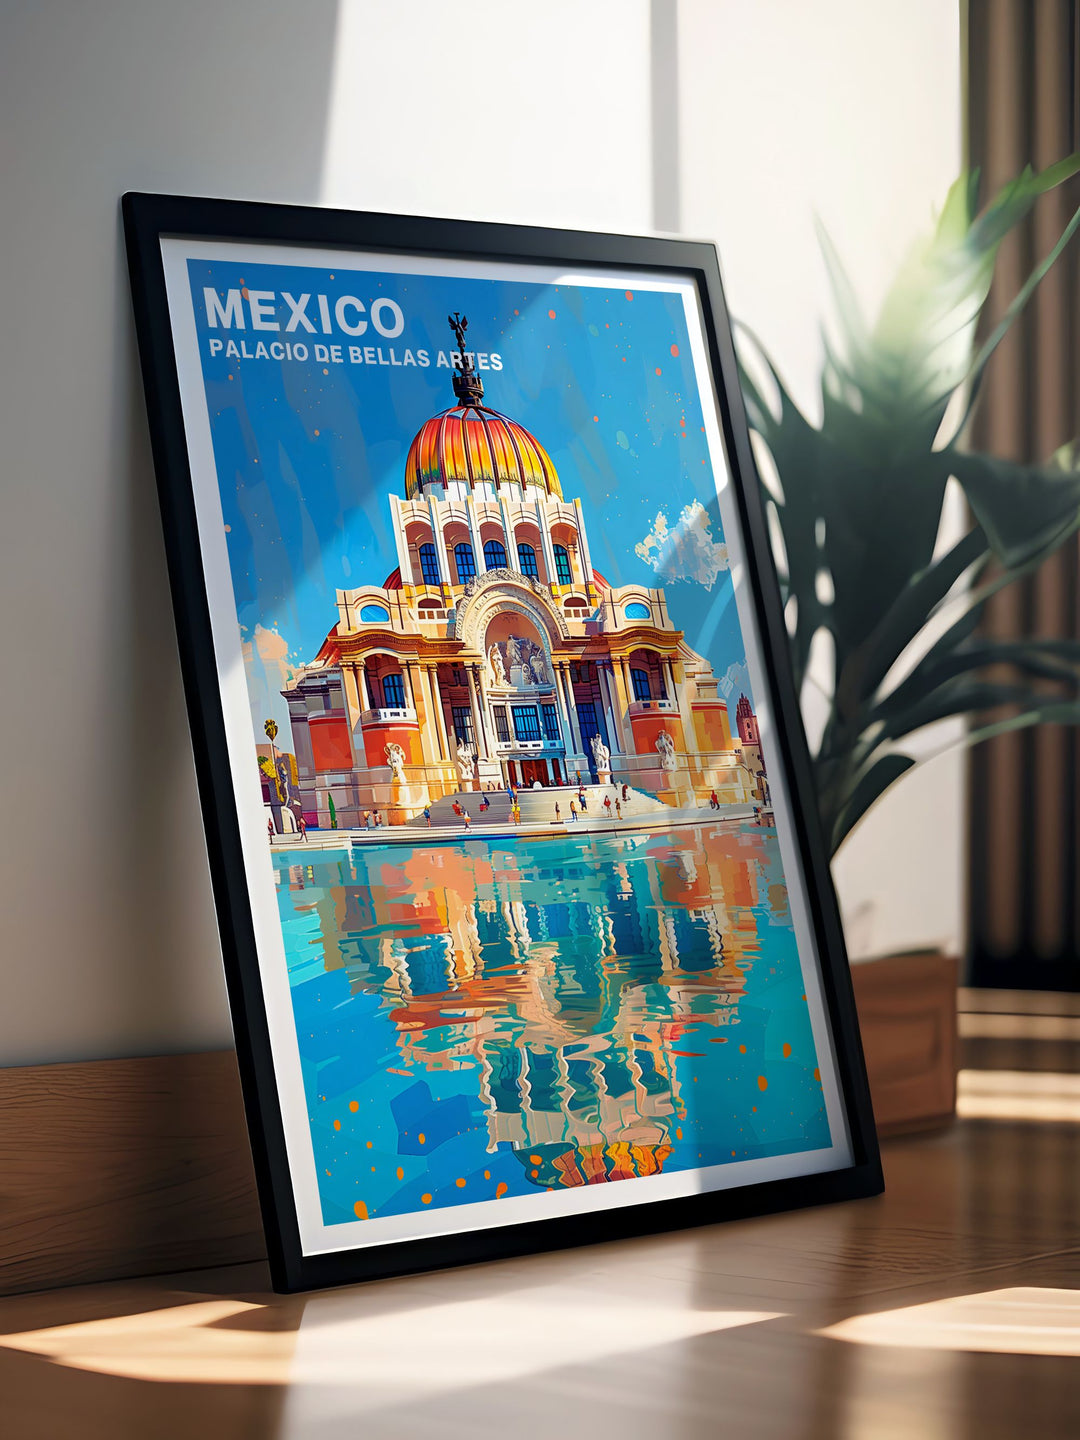 This vibrant art print of Mexico City highlights the citys dynamic cultural scene and historic sites, making it a standout piece for those who appreciate diverse cultural environments.